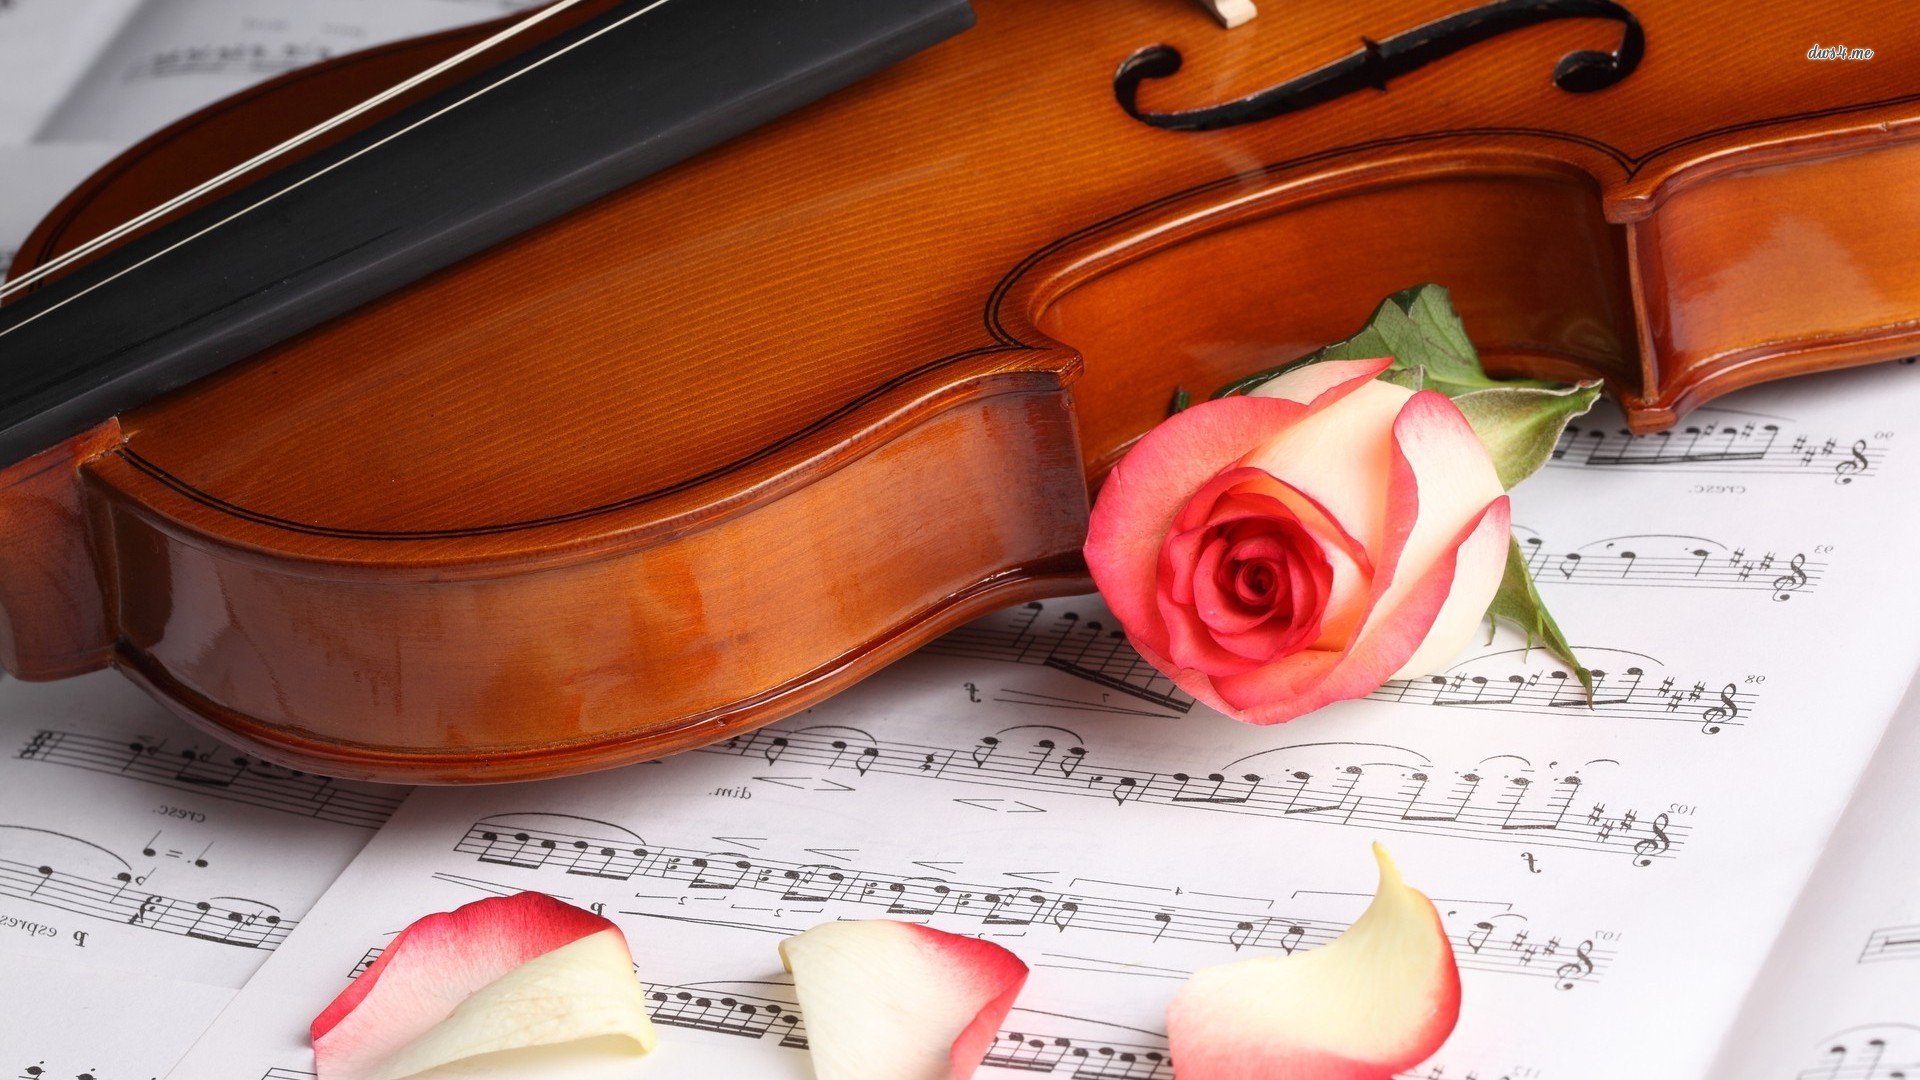 1920x1080 ... Violin and rose on music sheet wallpaper  ...